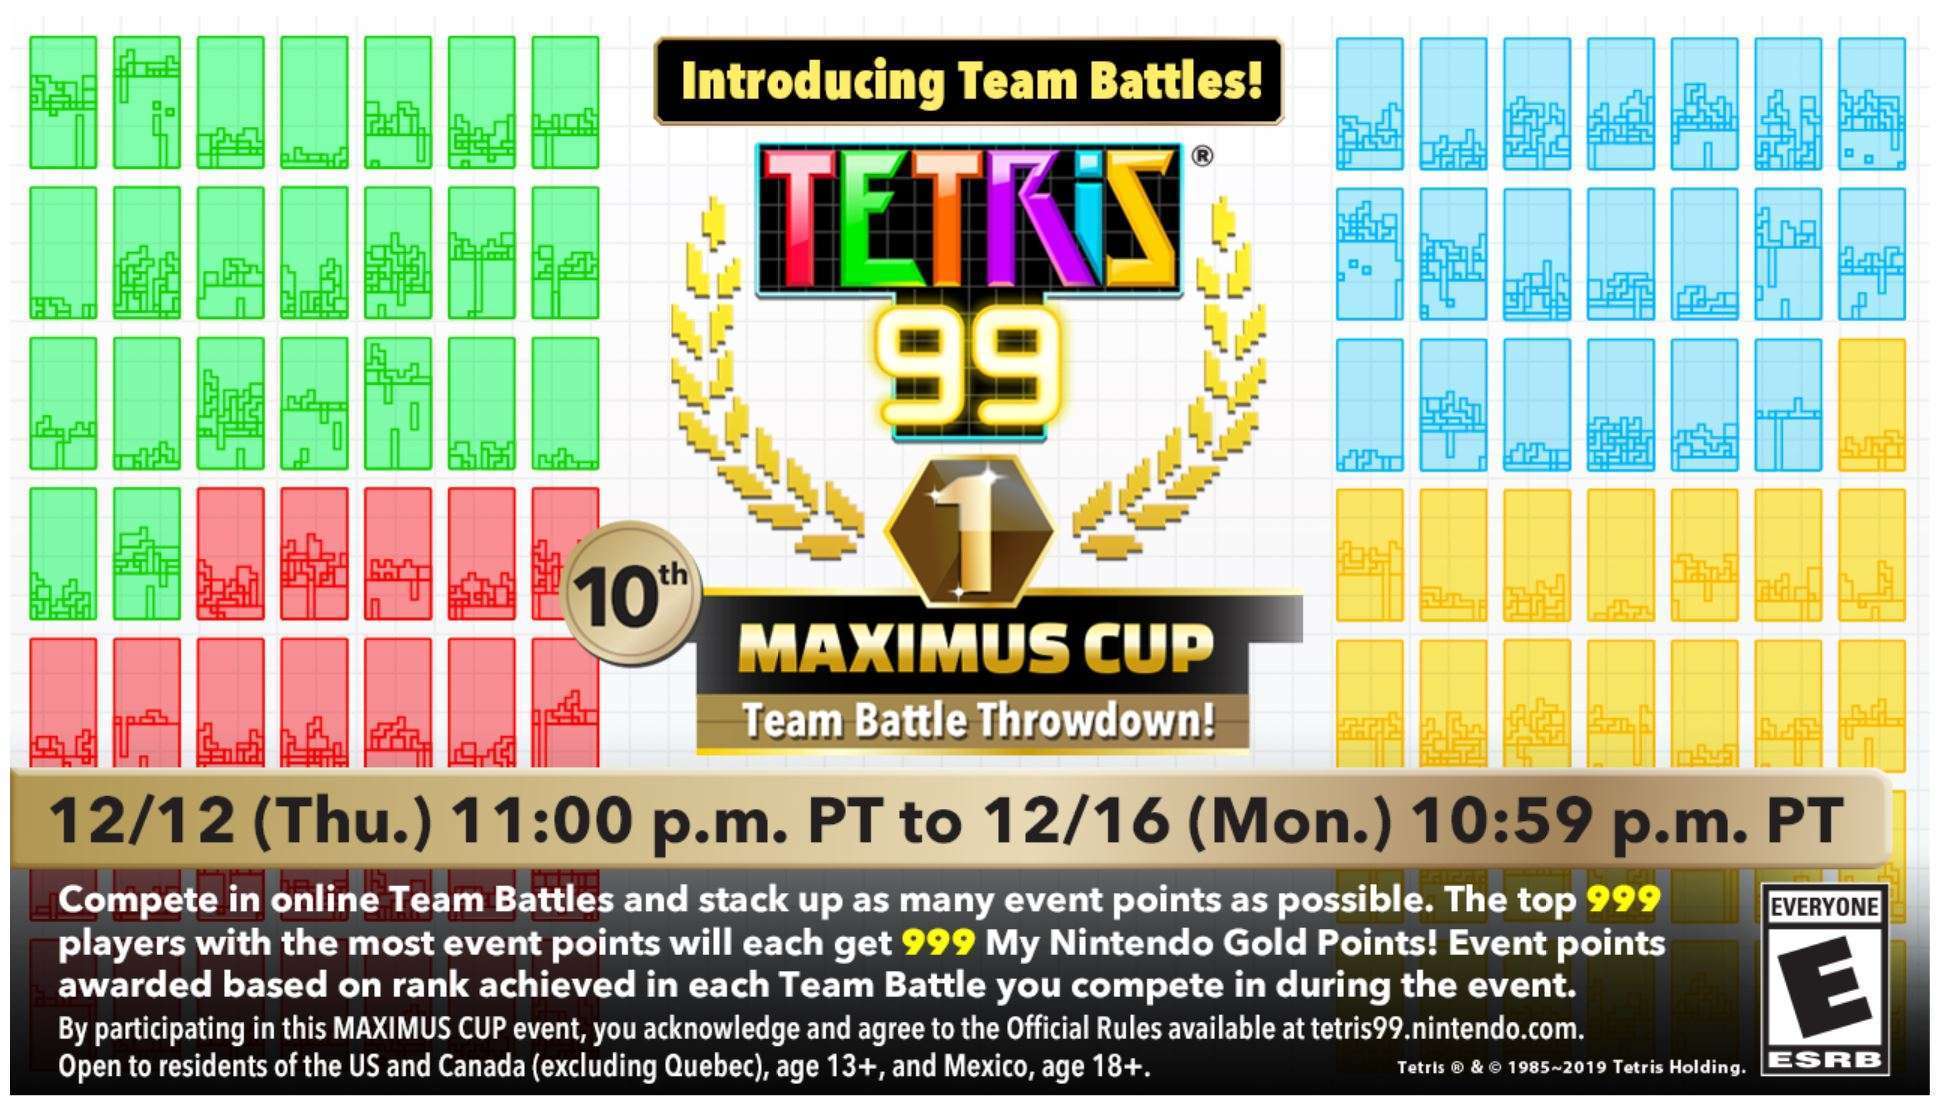 Tetris 99 Hard Drops a Free Update with Team Battle Mode and Additional Features in Lead-up to 10th MAXIMUS CUP